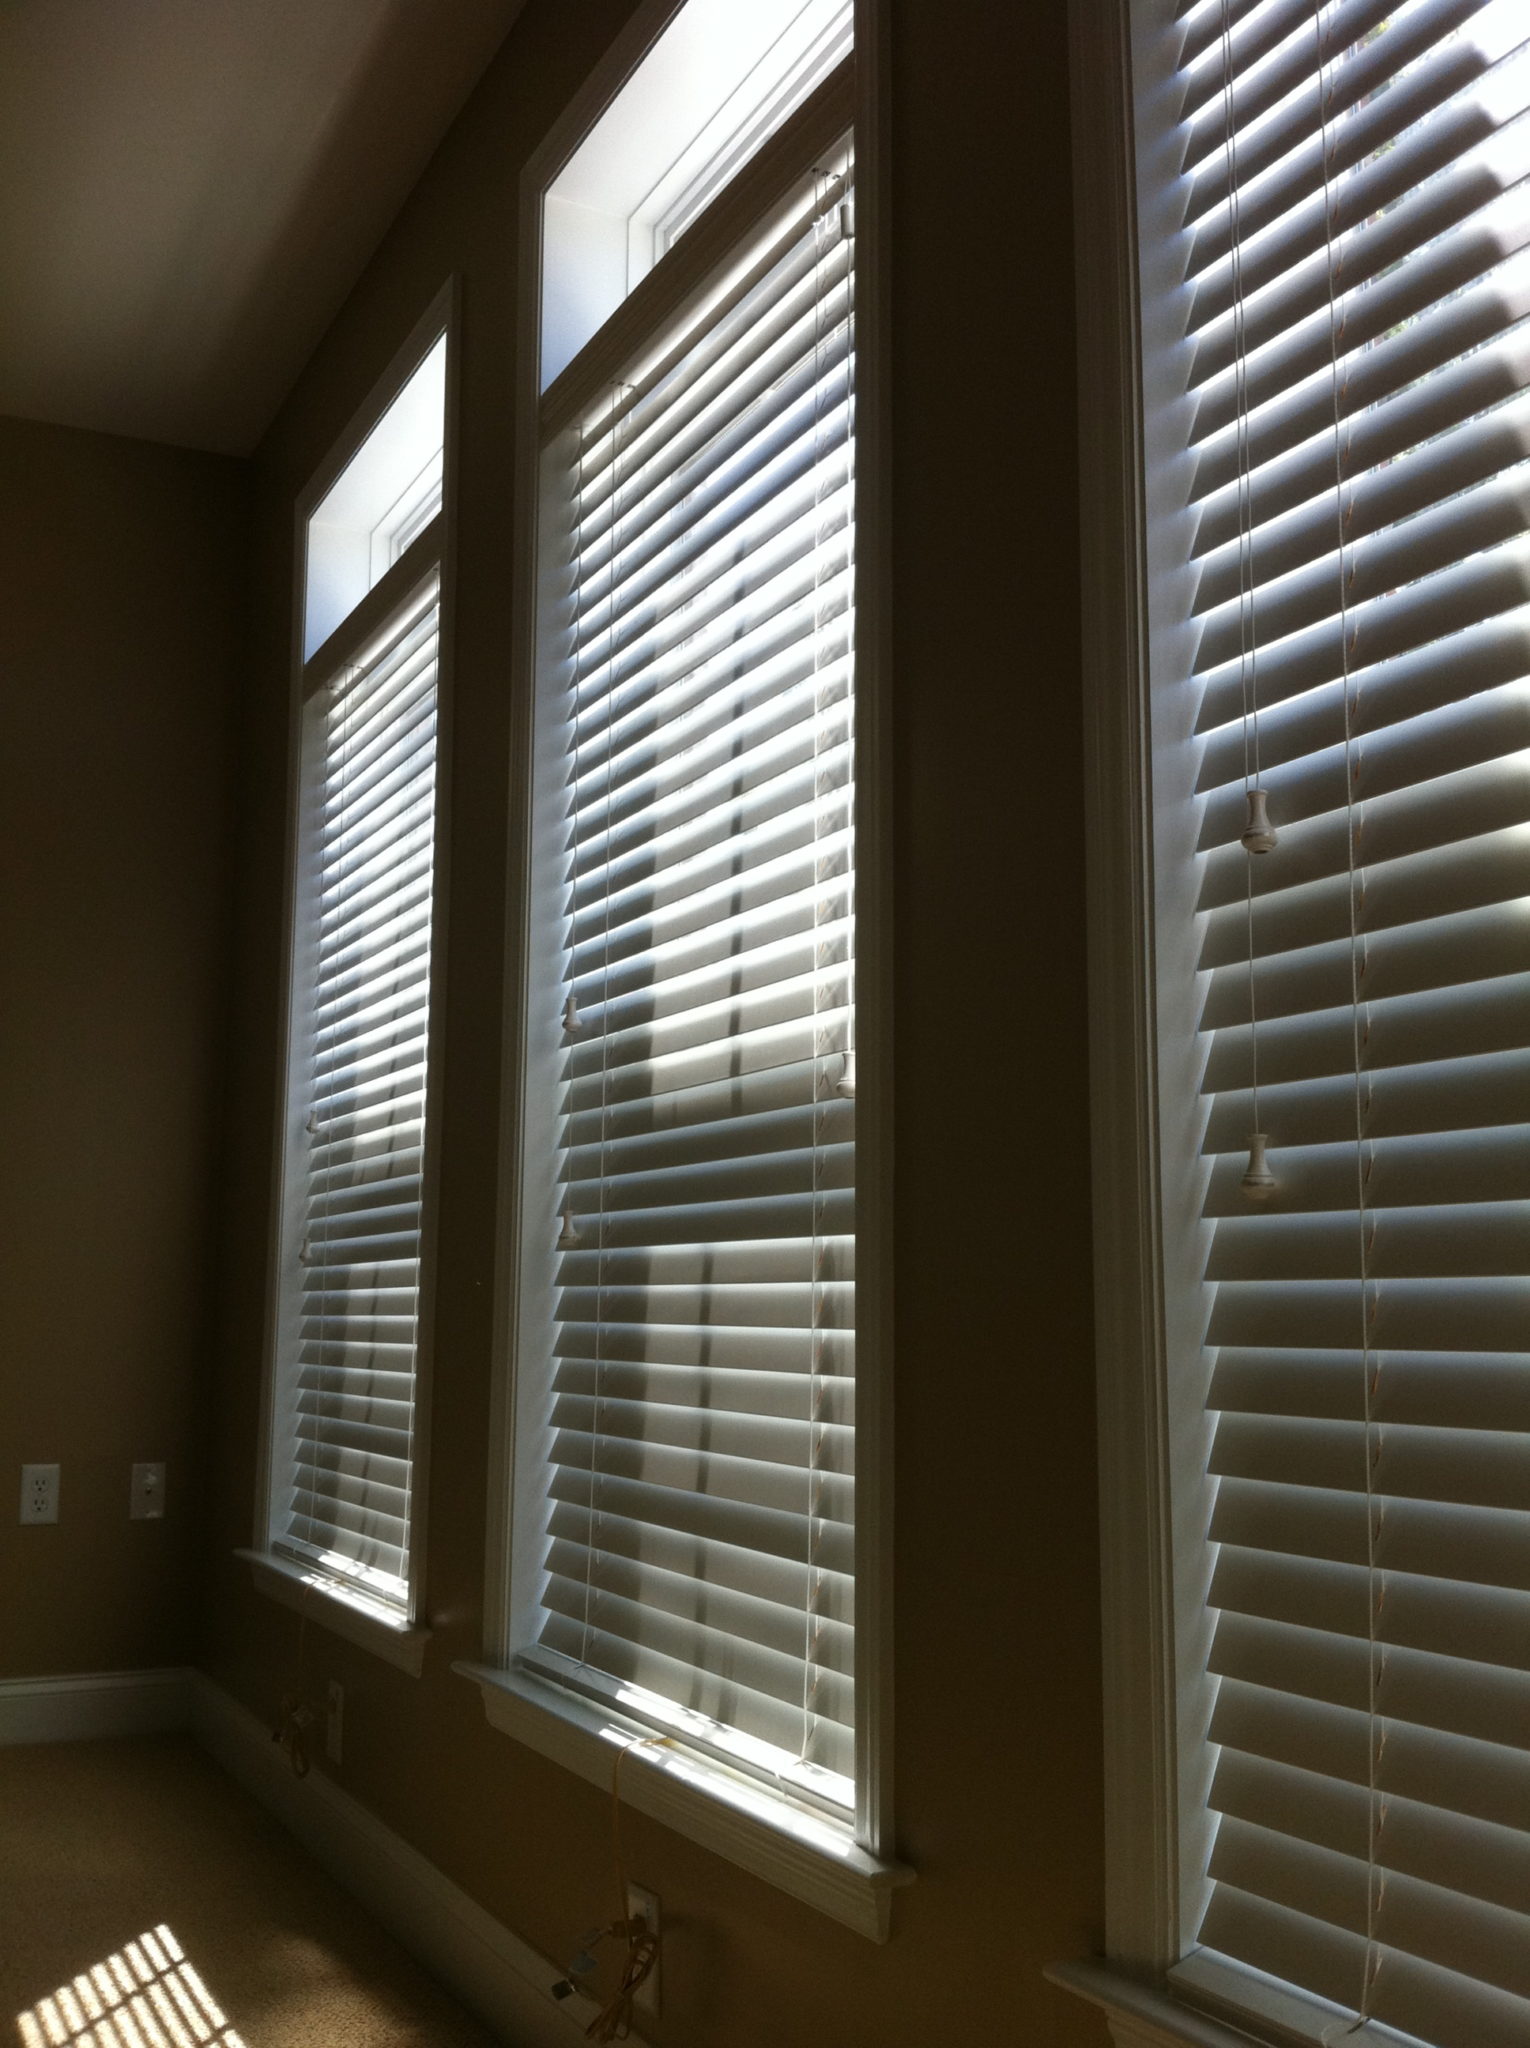 3 Cleaning Tips to Help Keep Your New Blinds Clean